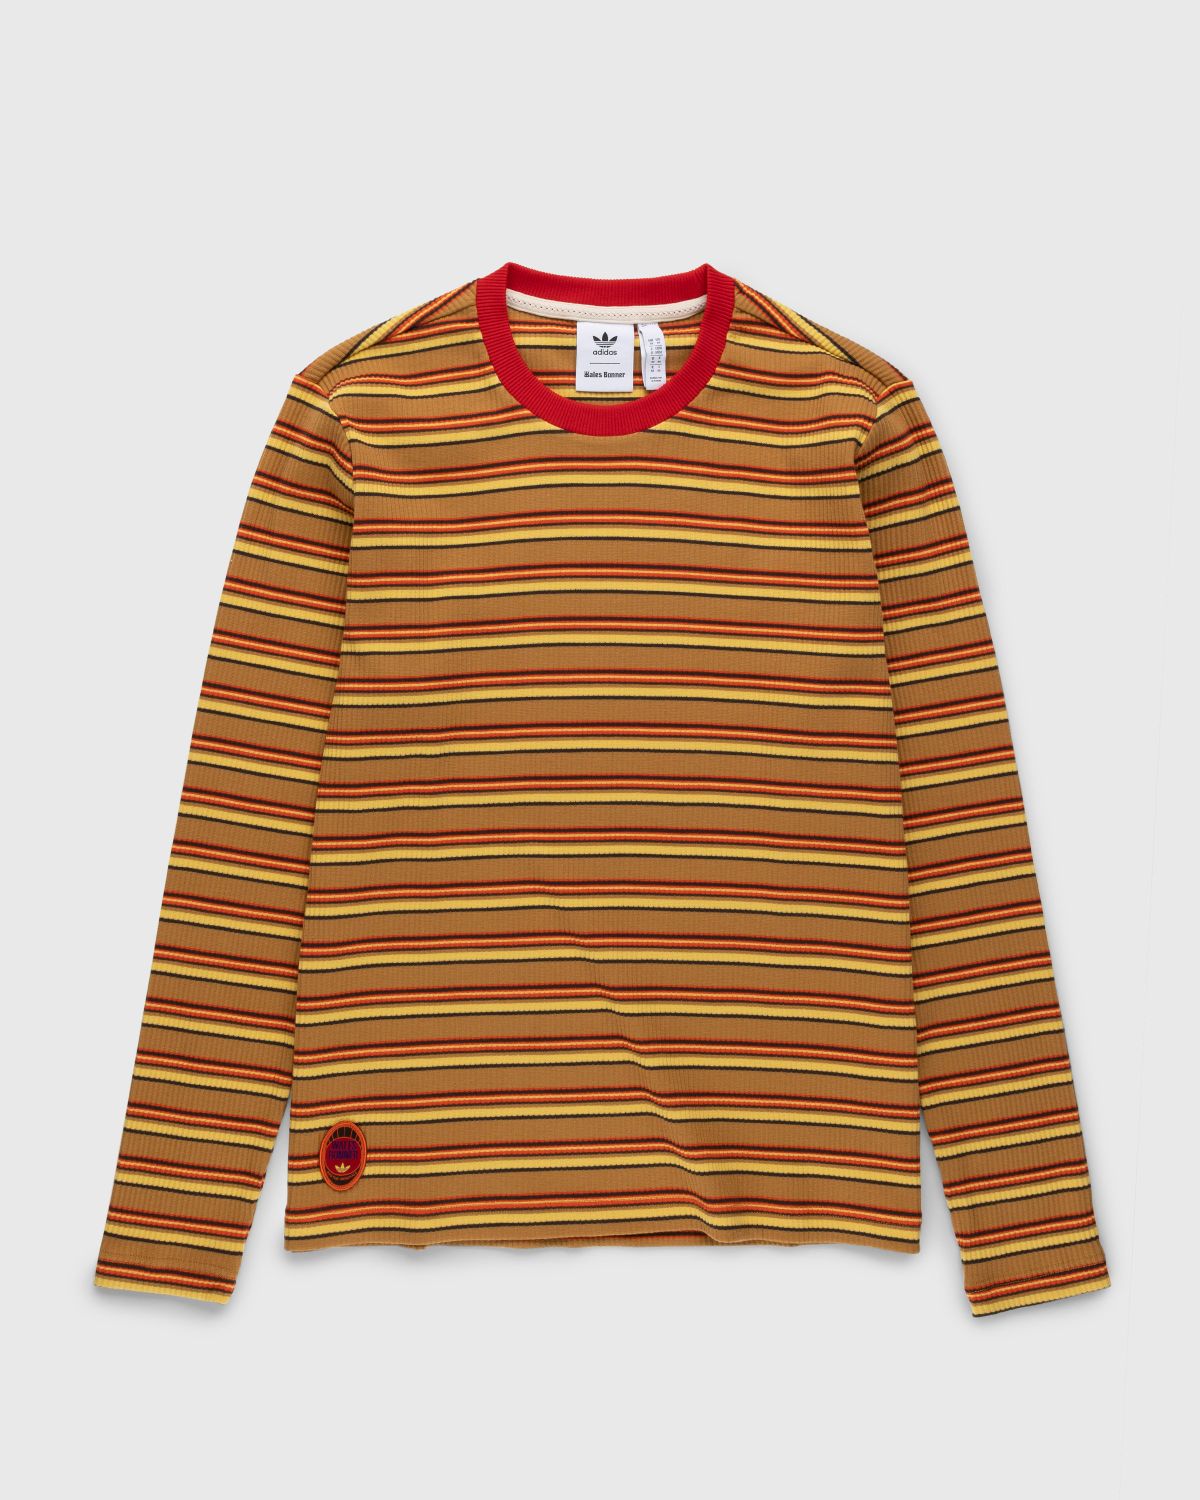 Adidas x Wales Bonner – WB Striped Longsleeve St Fade Gold/Scarlet - Longsleeves - Red - Image 1